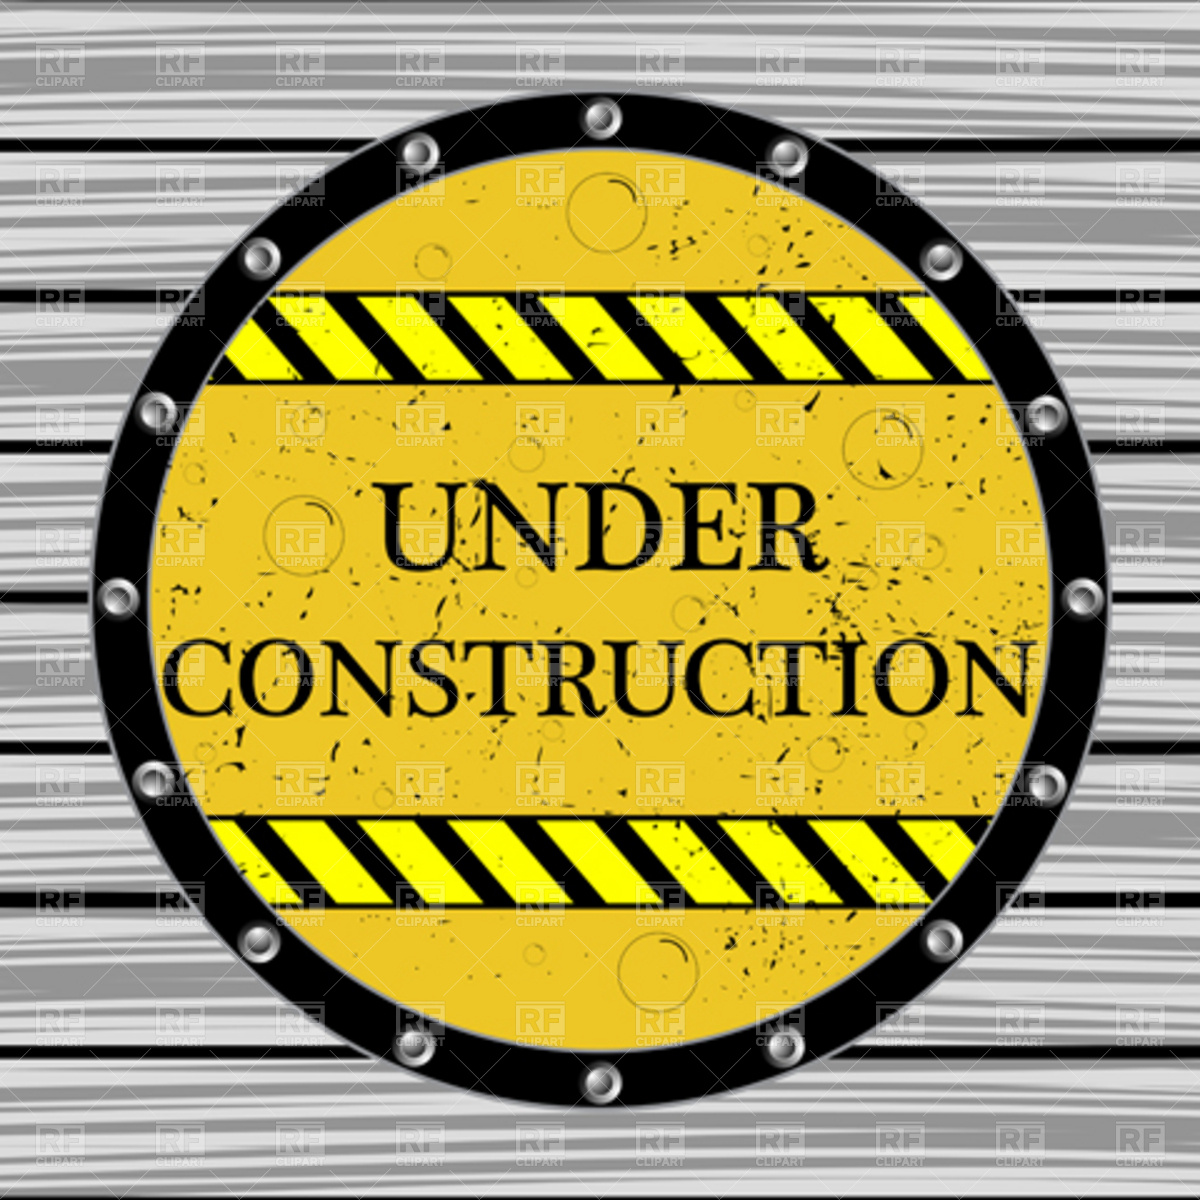 Under Construction Sign 4323 Signs Symbols Maps Download Royalty